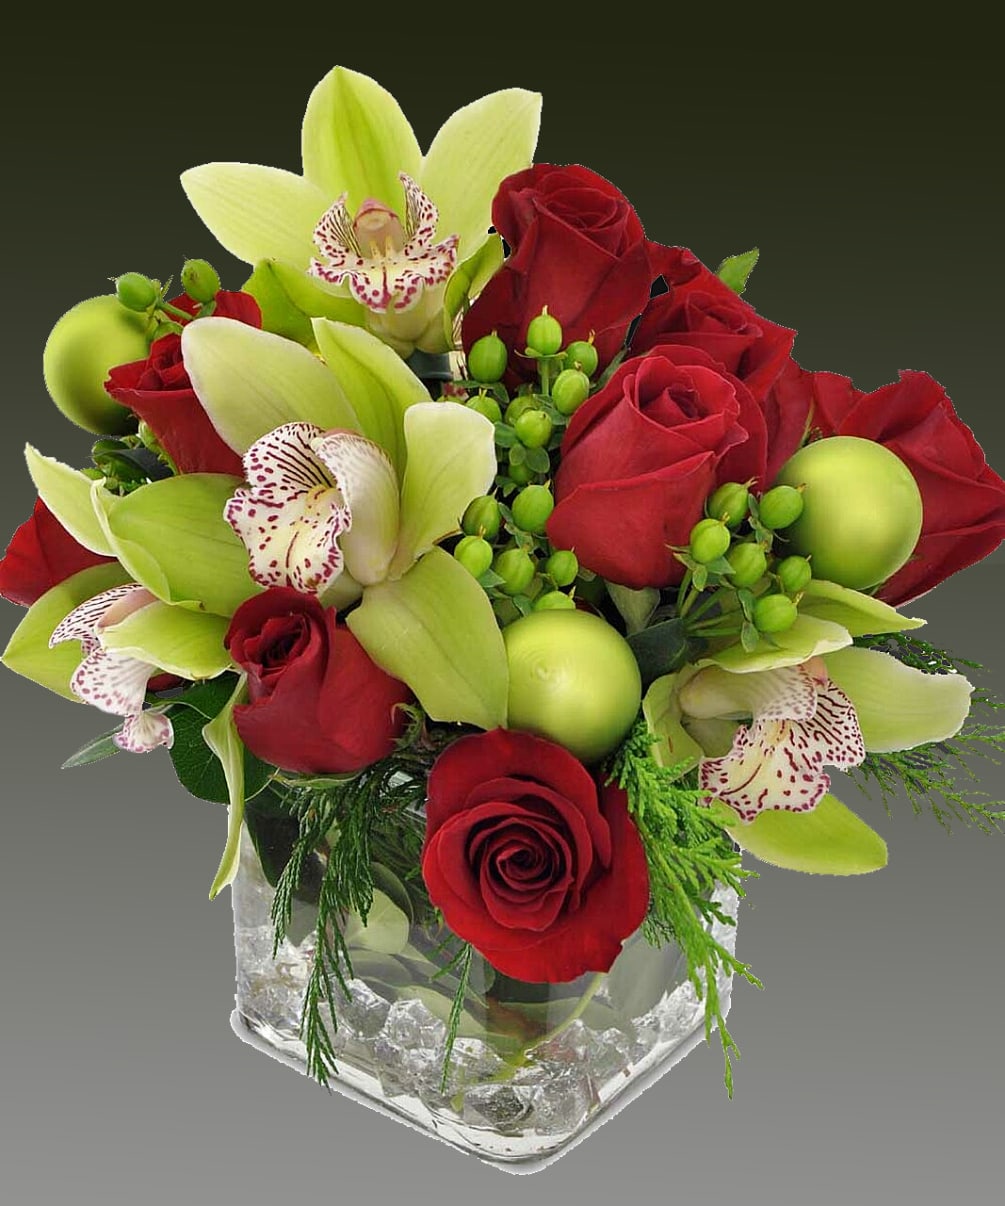 Green cymbidium orchids beauty abounds in this red roses. 